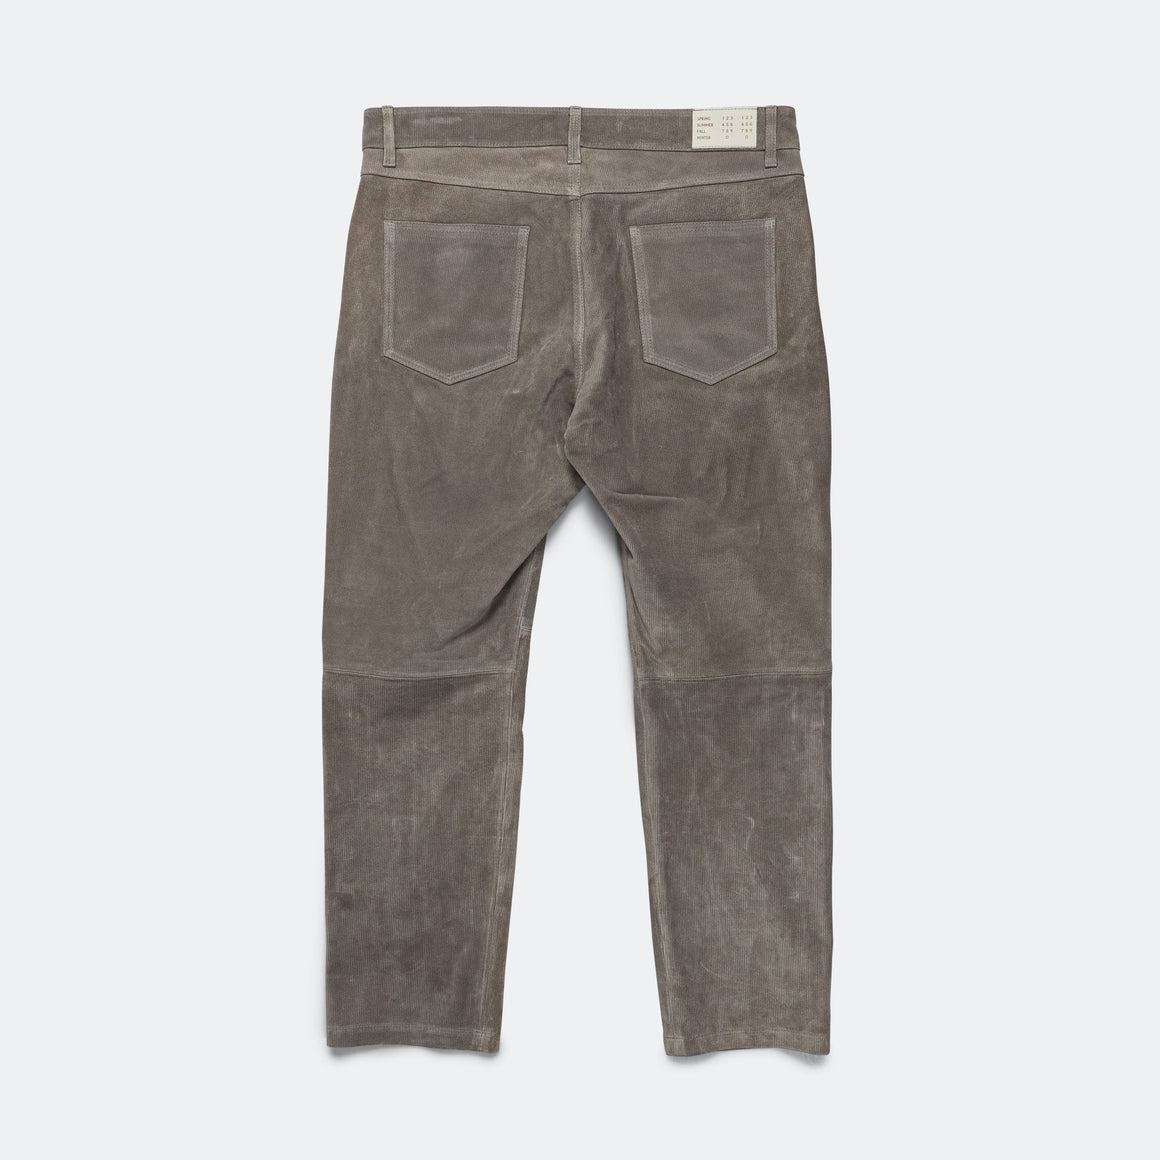 4SDesigns - Leather Corduroy ERN Pant - Light Grey - UP THERE